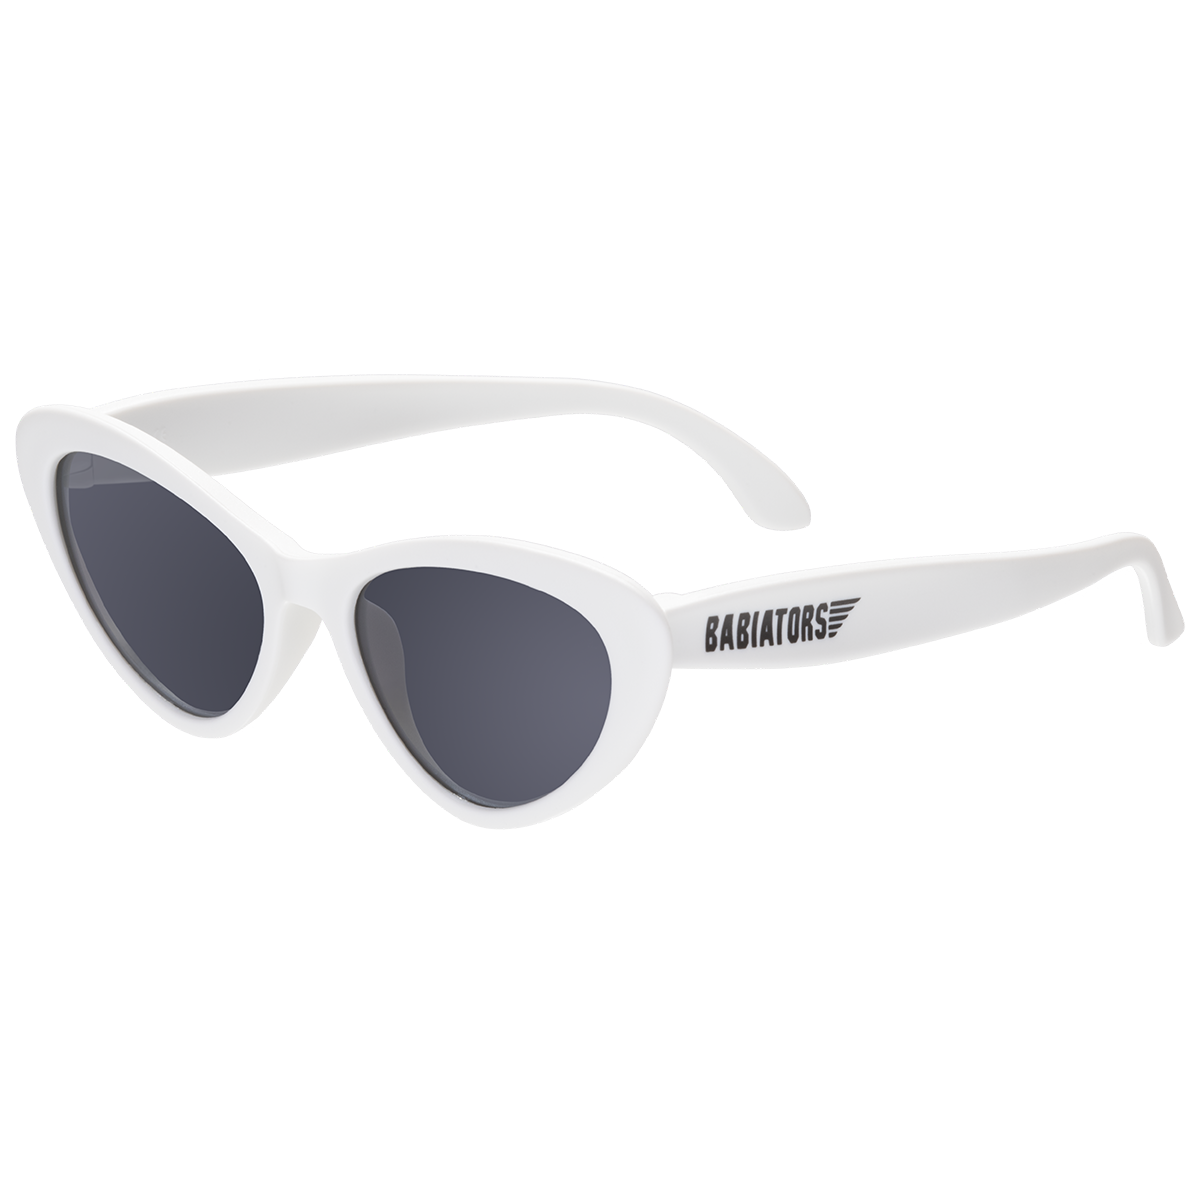 Cat eye shaped baby and toddler sunglasses -- in "wicked white". 100% UVA and UVB protection. Babiators